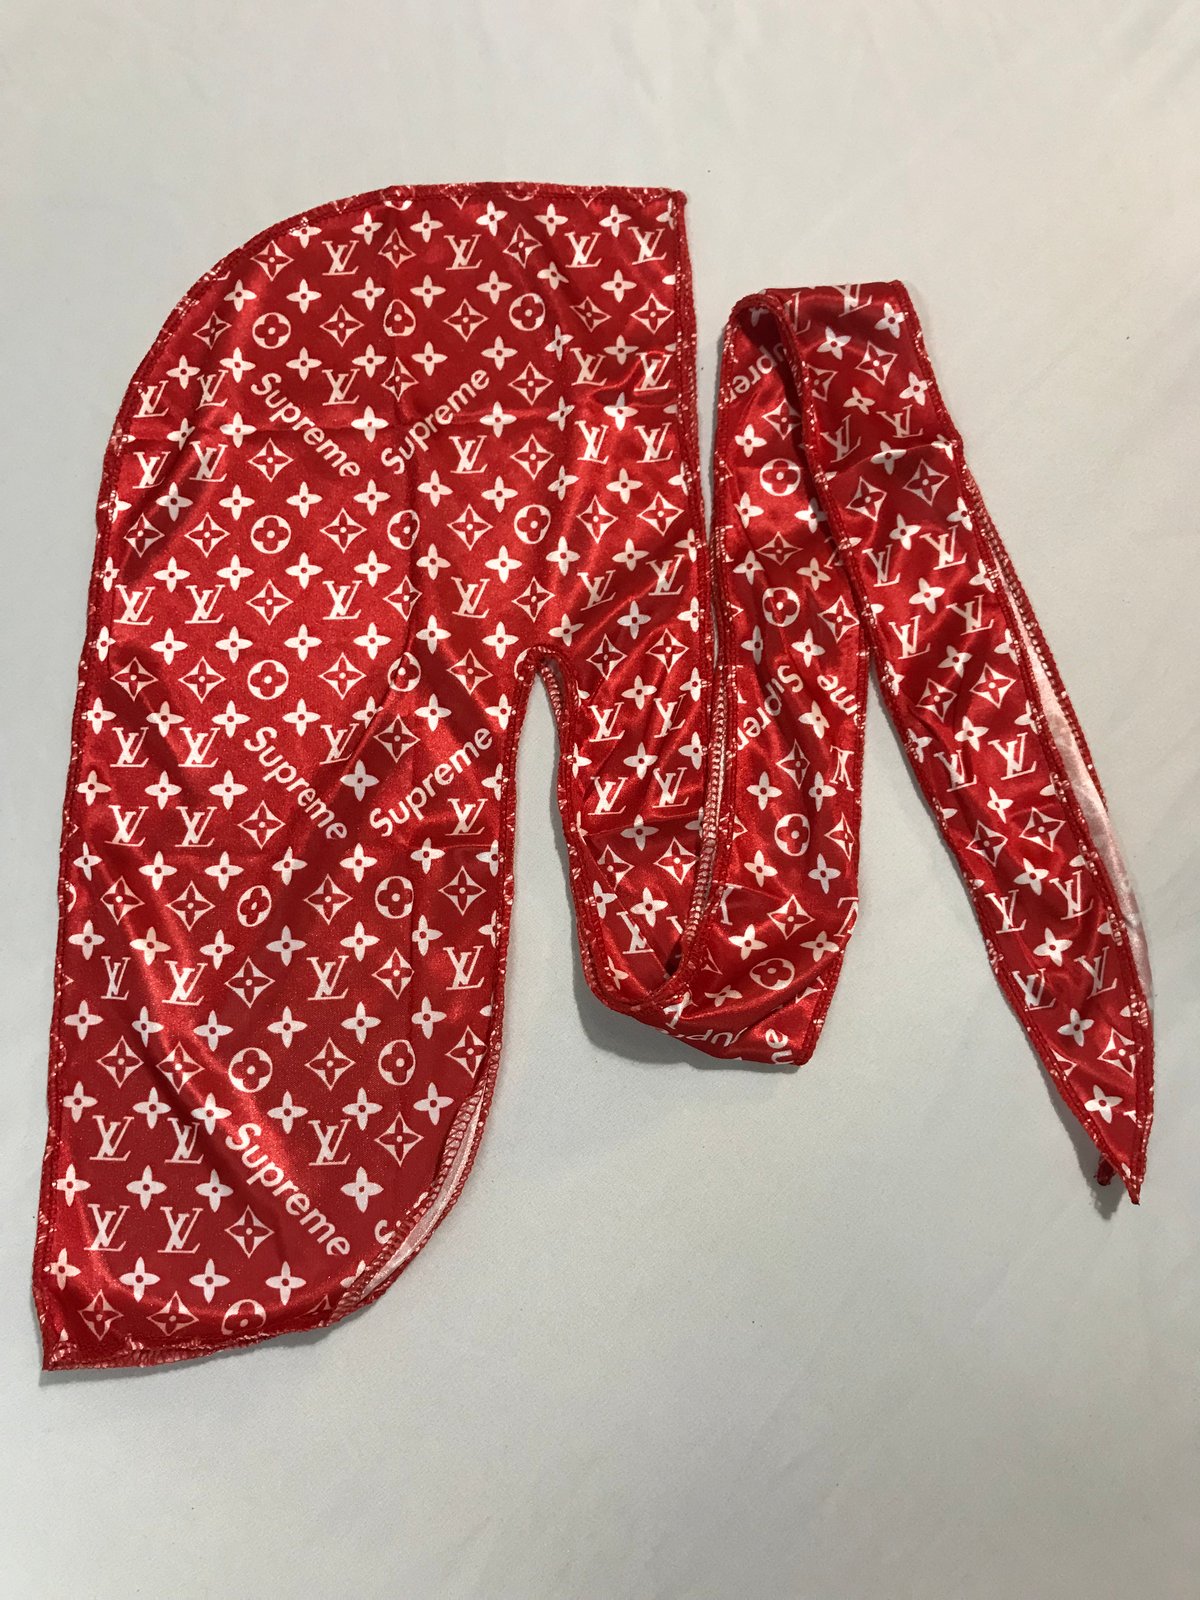 louis vuitton red supreme hoodie